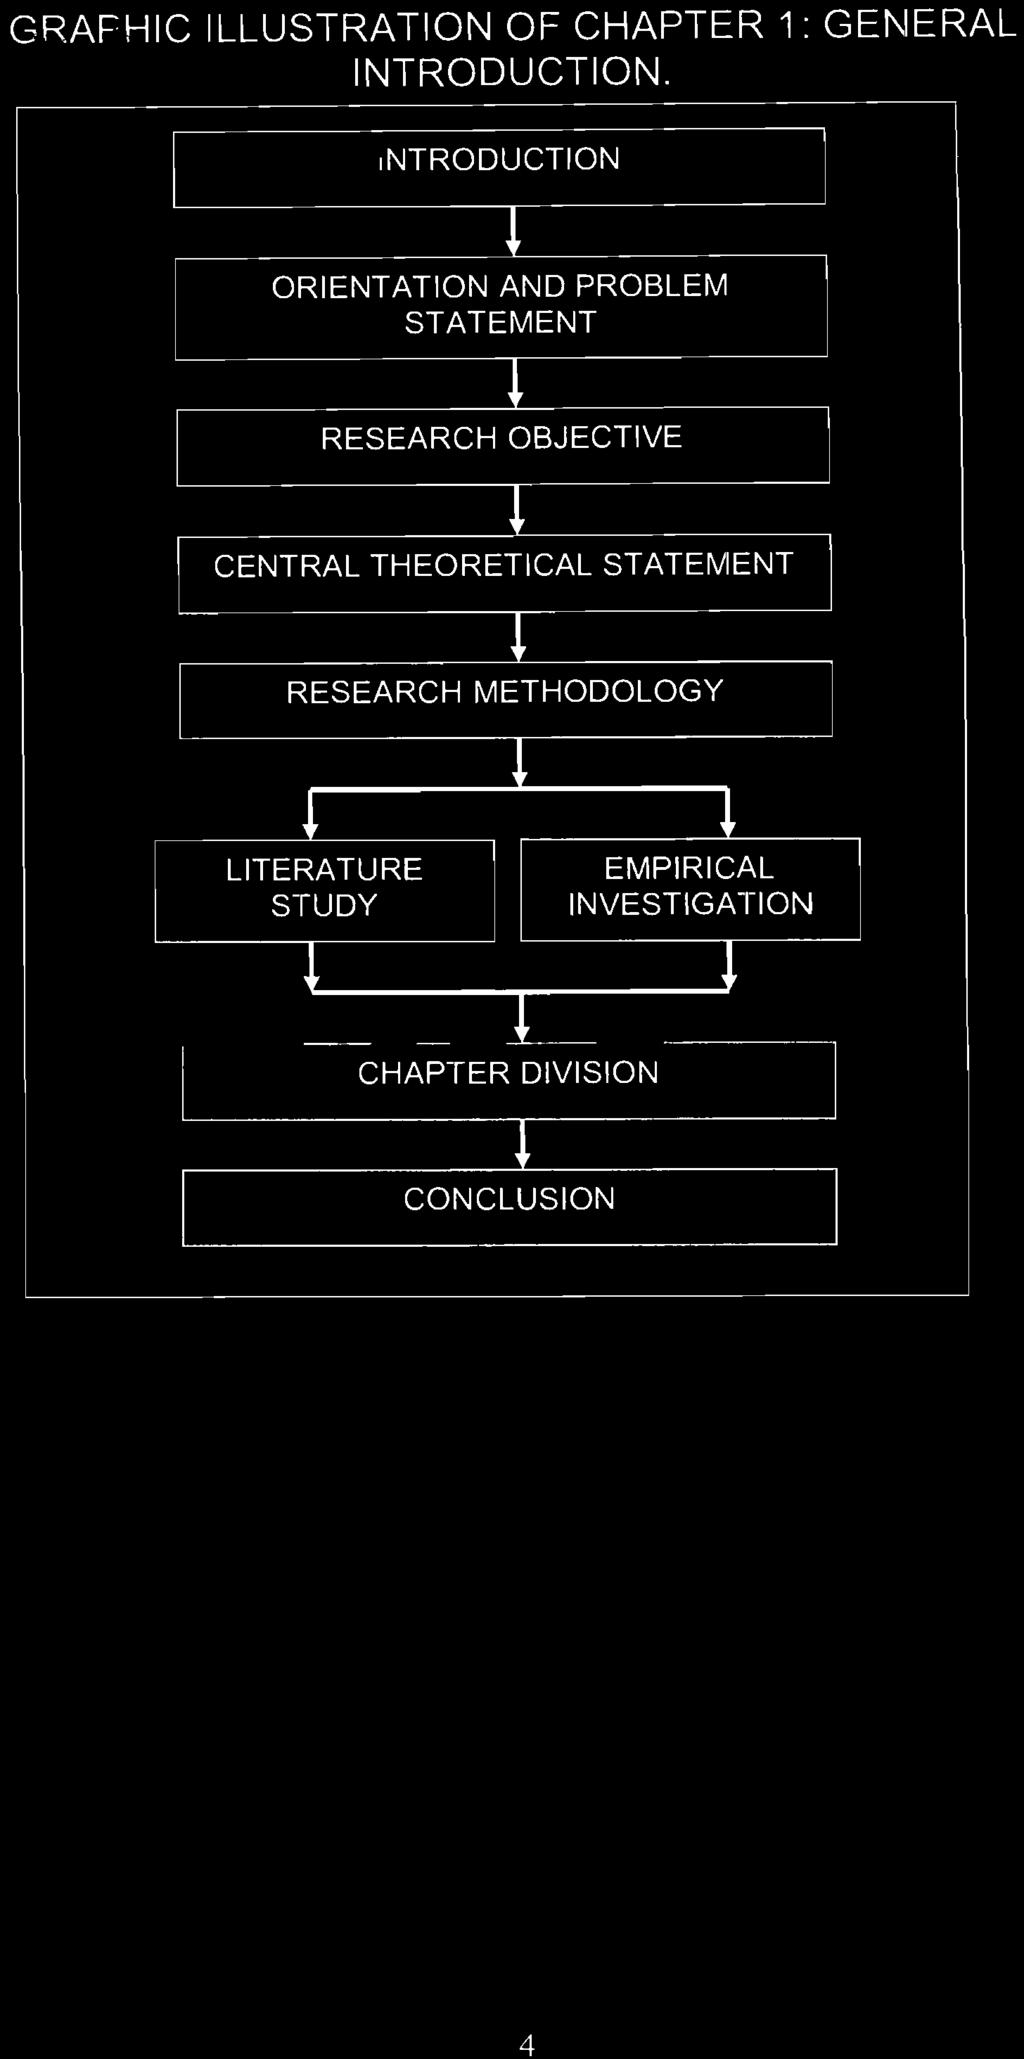 THEORETICAL STATEMENT l RESEARCH